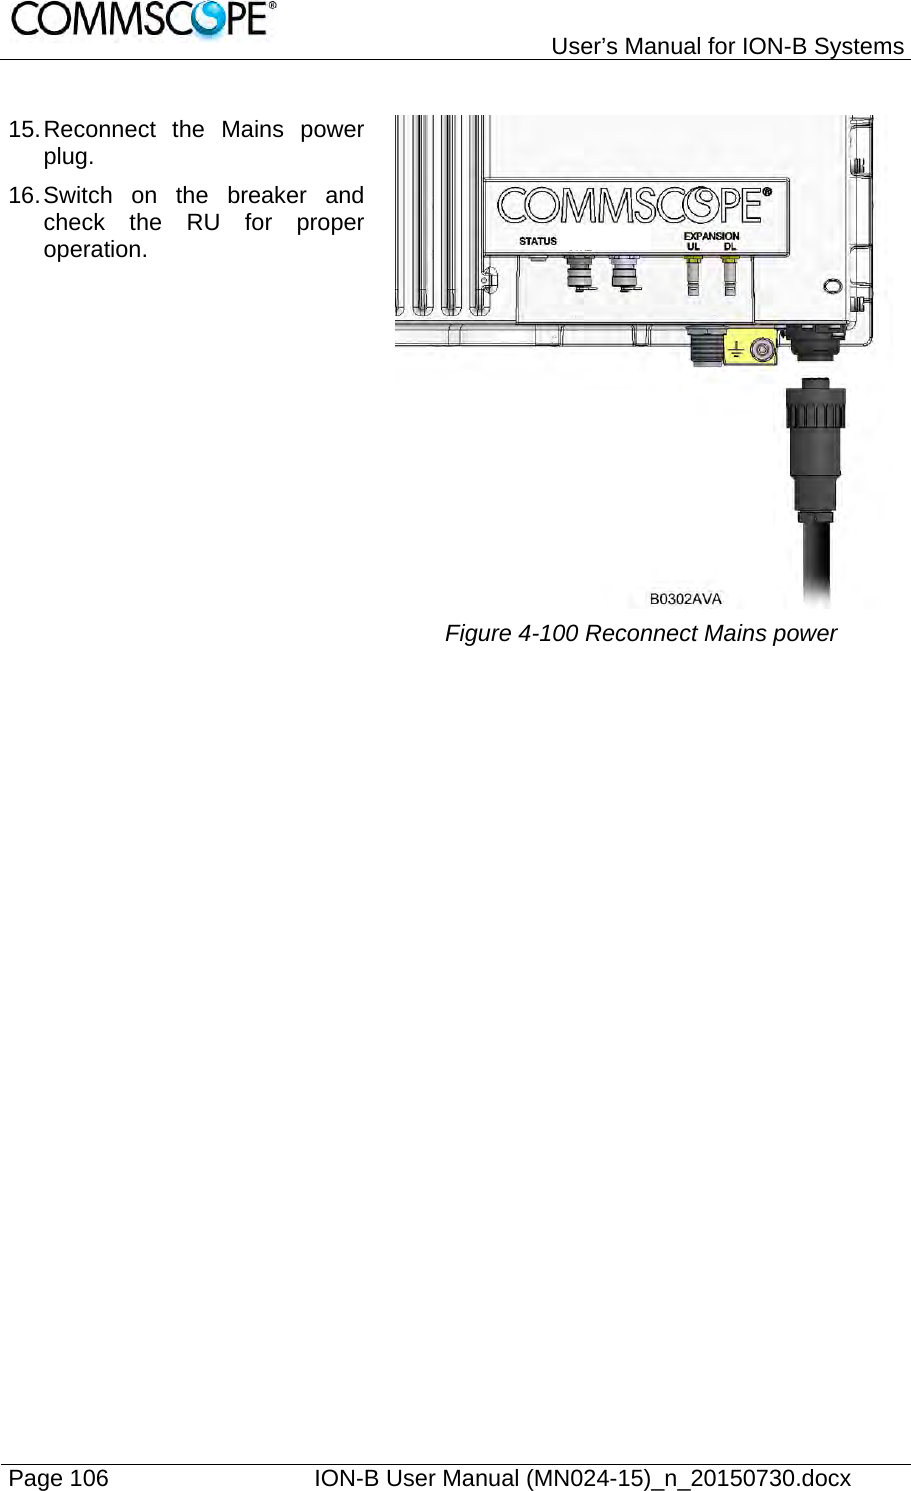   User’s Manual for ION-B Systems Page 106    ION-B User Manual (MN024-15)_n_20150730.docx  15. Reconnect the Mains power plug. 16. Switch on the breaker and check the RU for proper operation. Figure 4-100 Reconnect Mains power 